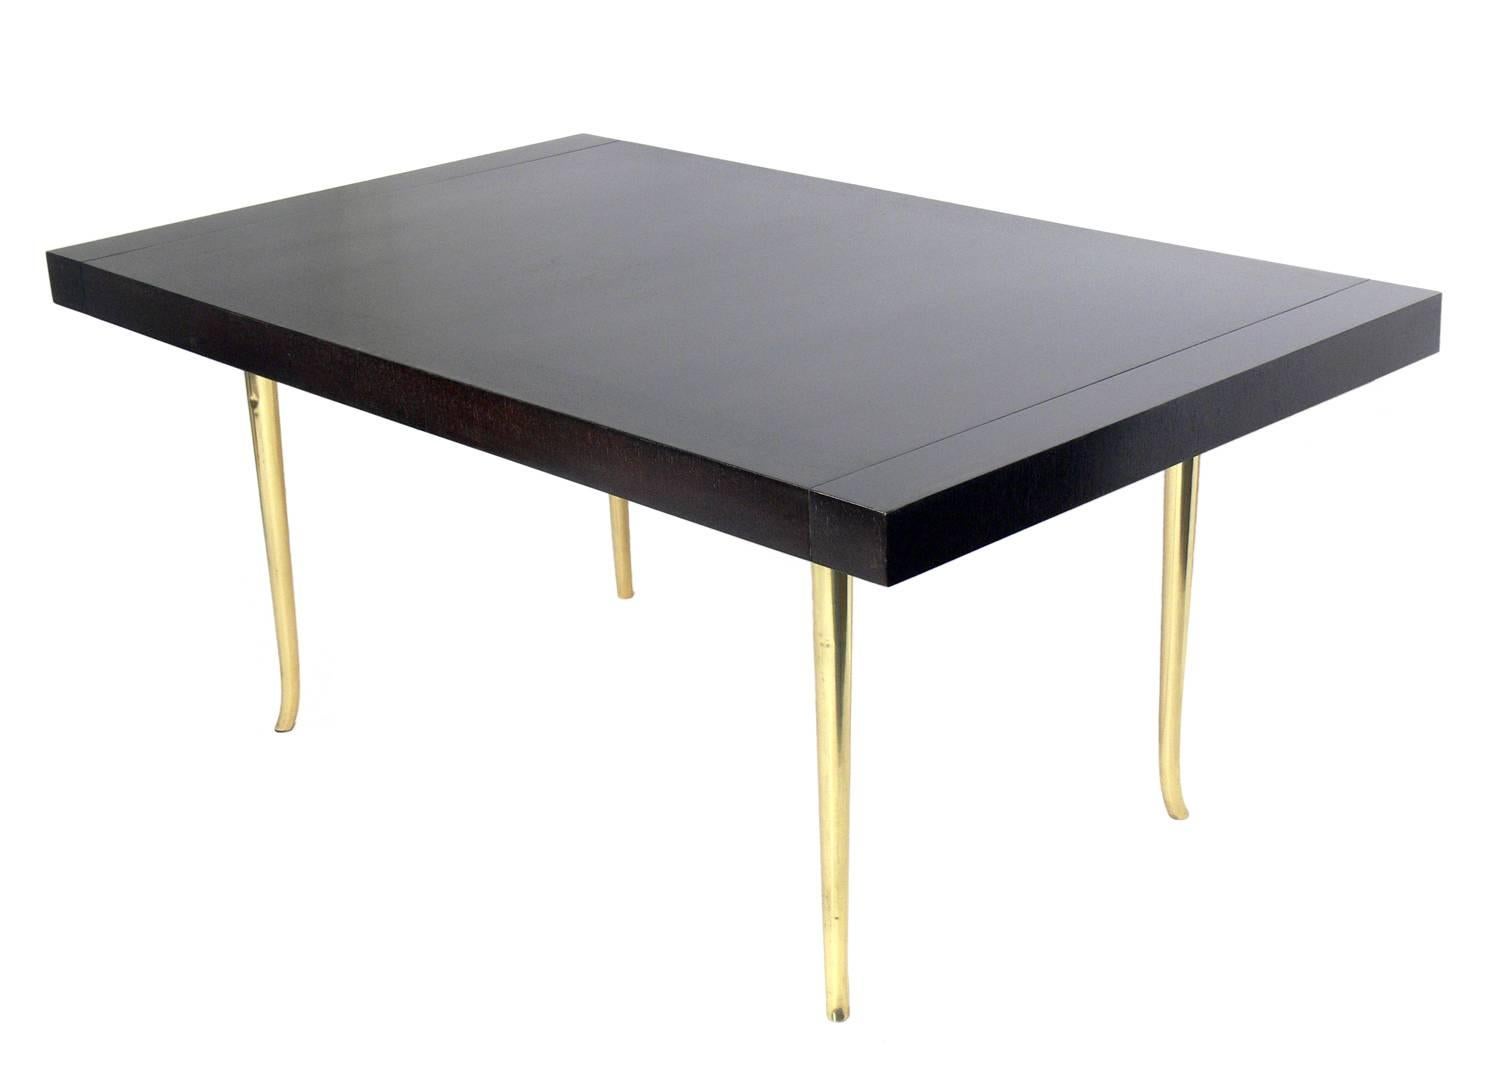 Brass Klismos leg dining table, designed by T.H. Robsjohn-Gibbings for Widdicomb, American, circa 1960s. Recently refinished in an ultra-deep brown color, brass legs polished and lacquered. With both leaves installed the table measures an impressive